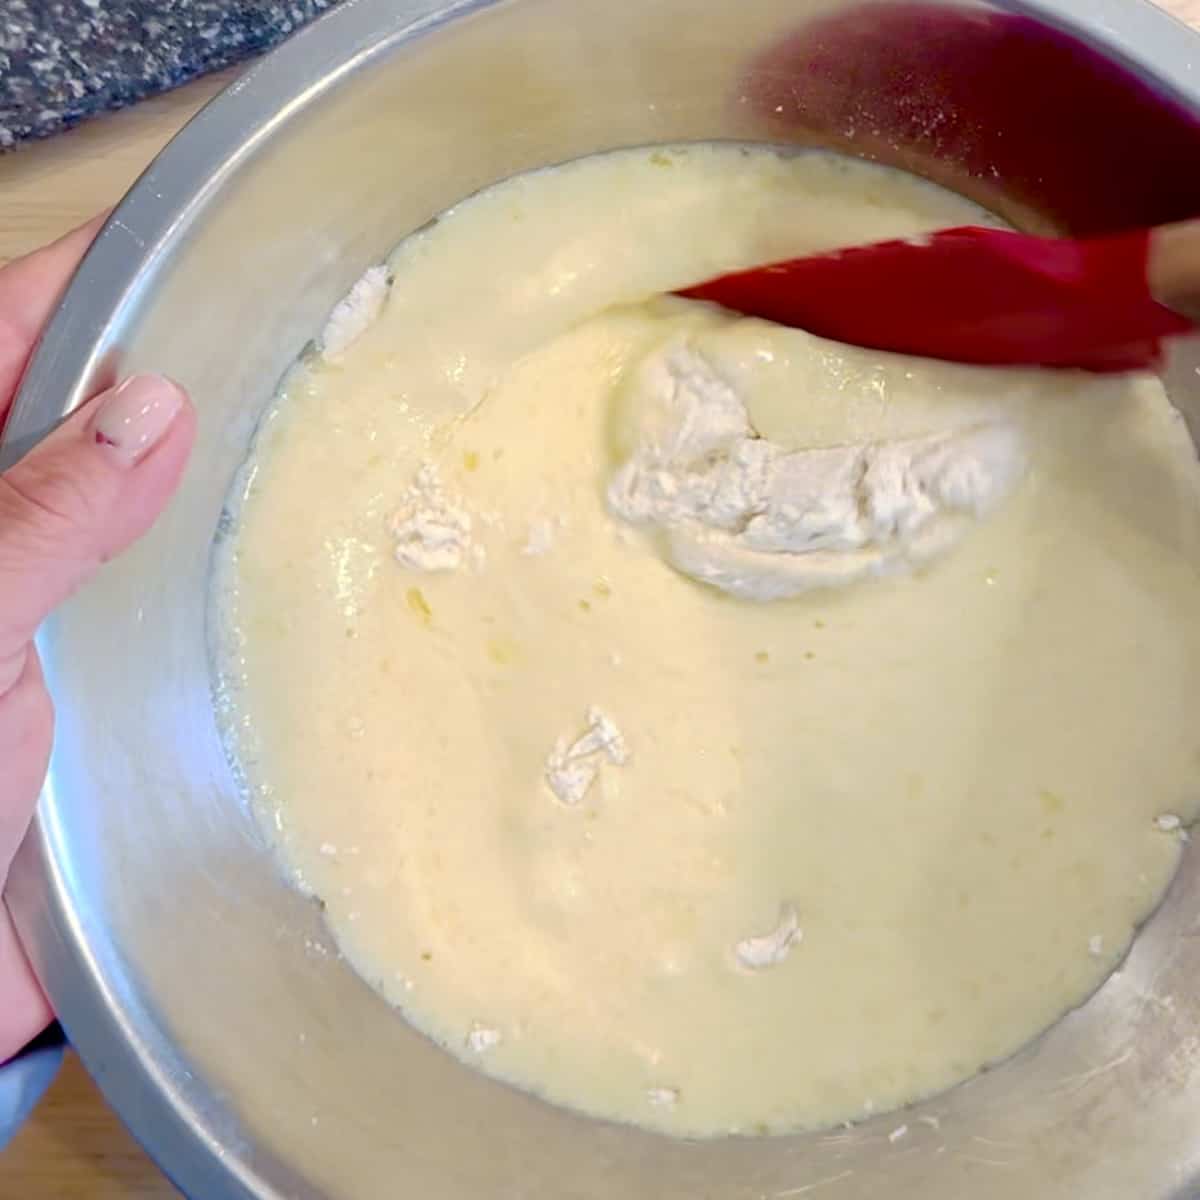 mixing waffle batter in a metal bowl.